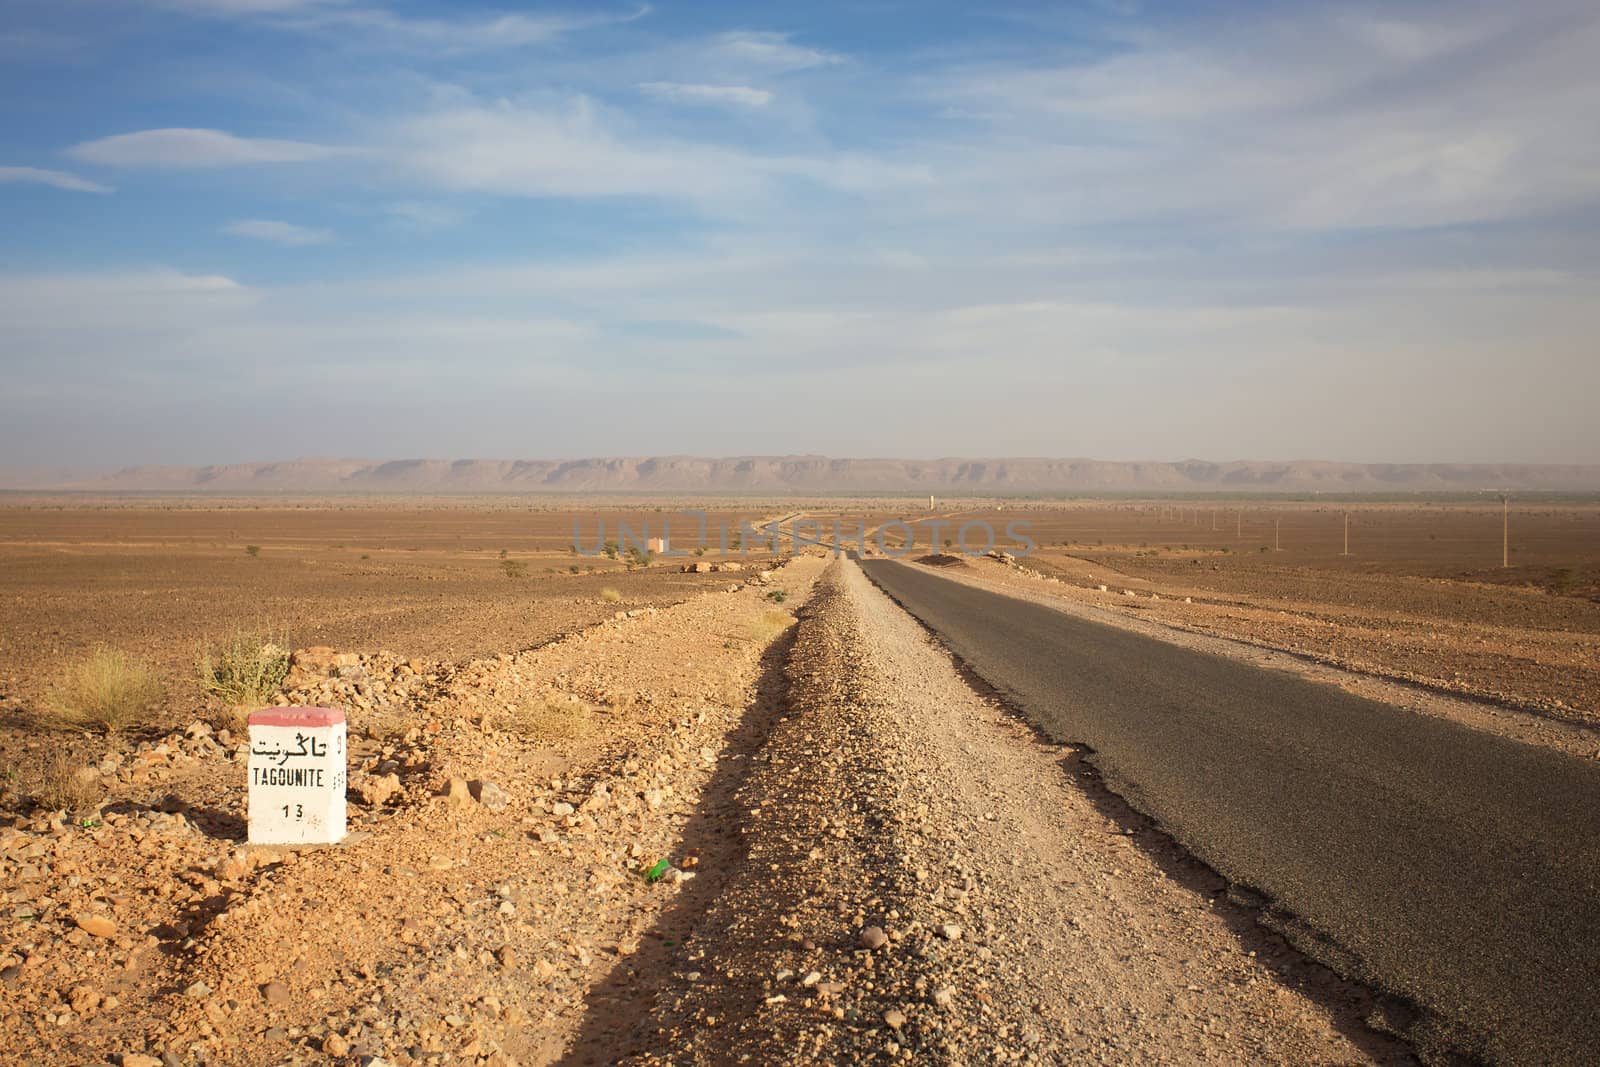 Road Sign to Tagounite in Morocco with blue sky